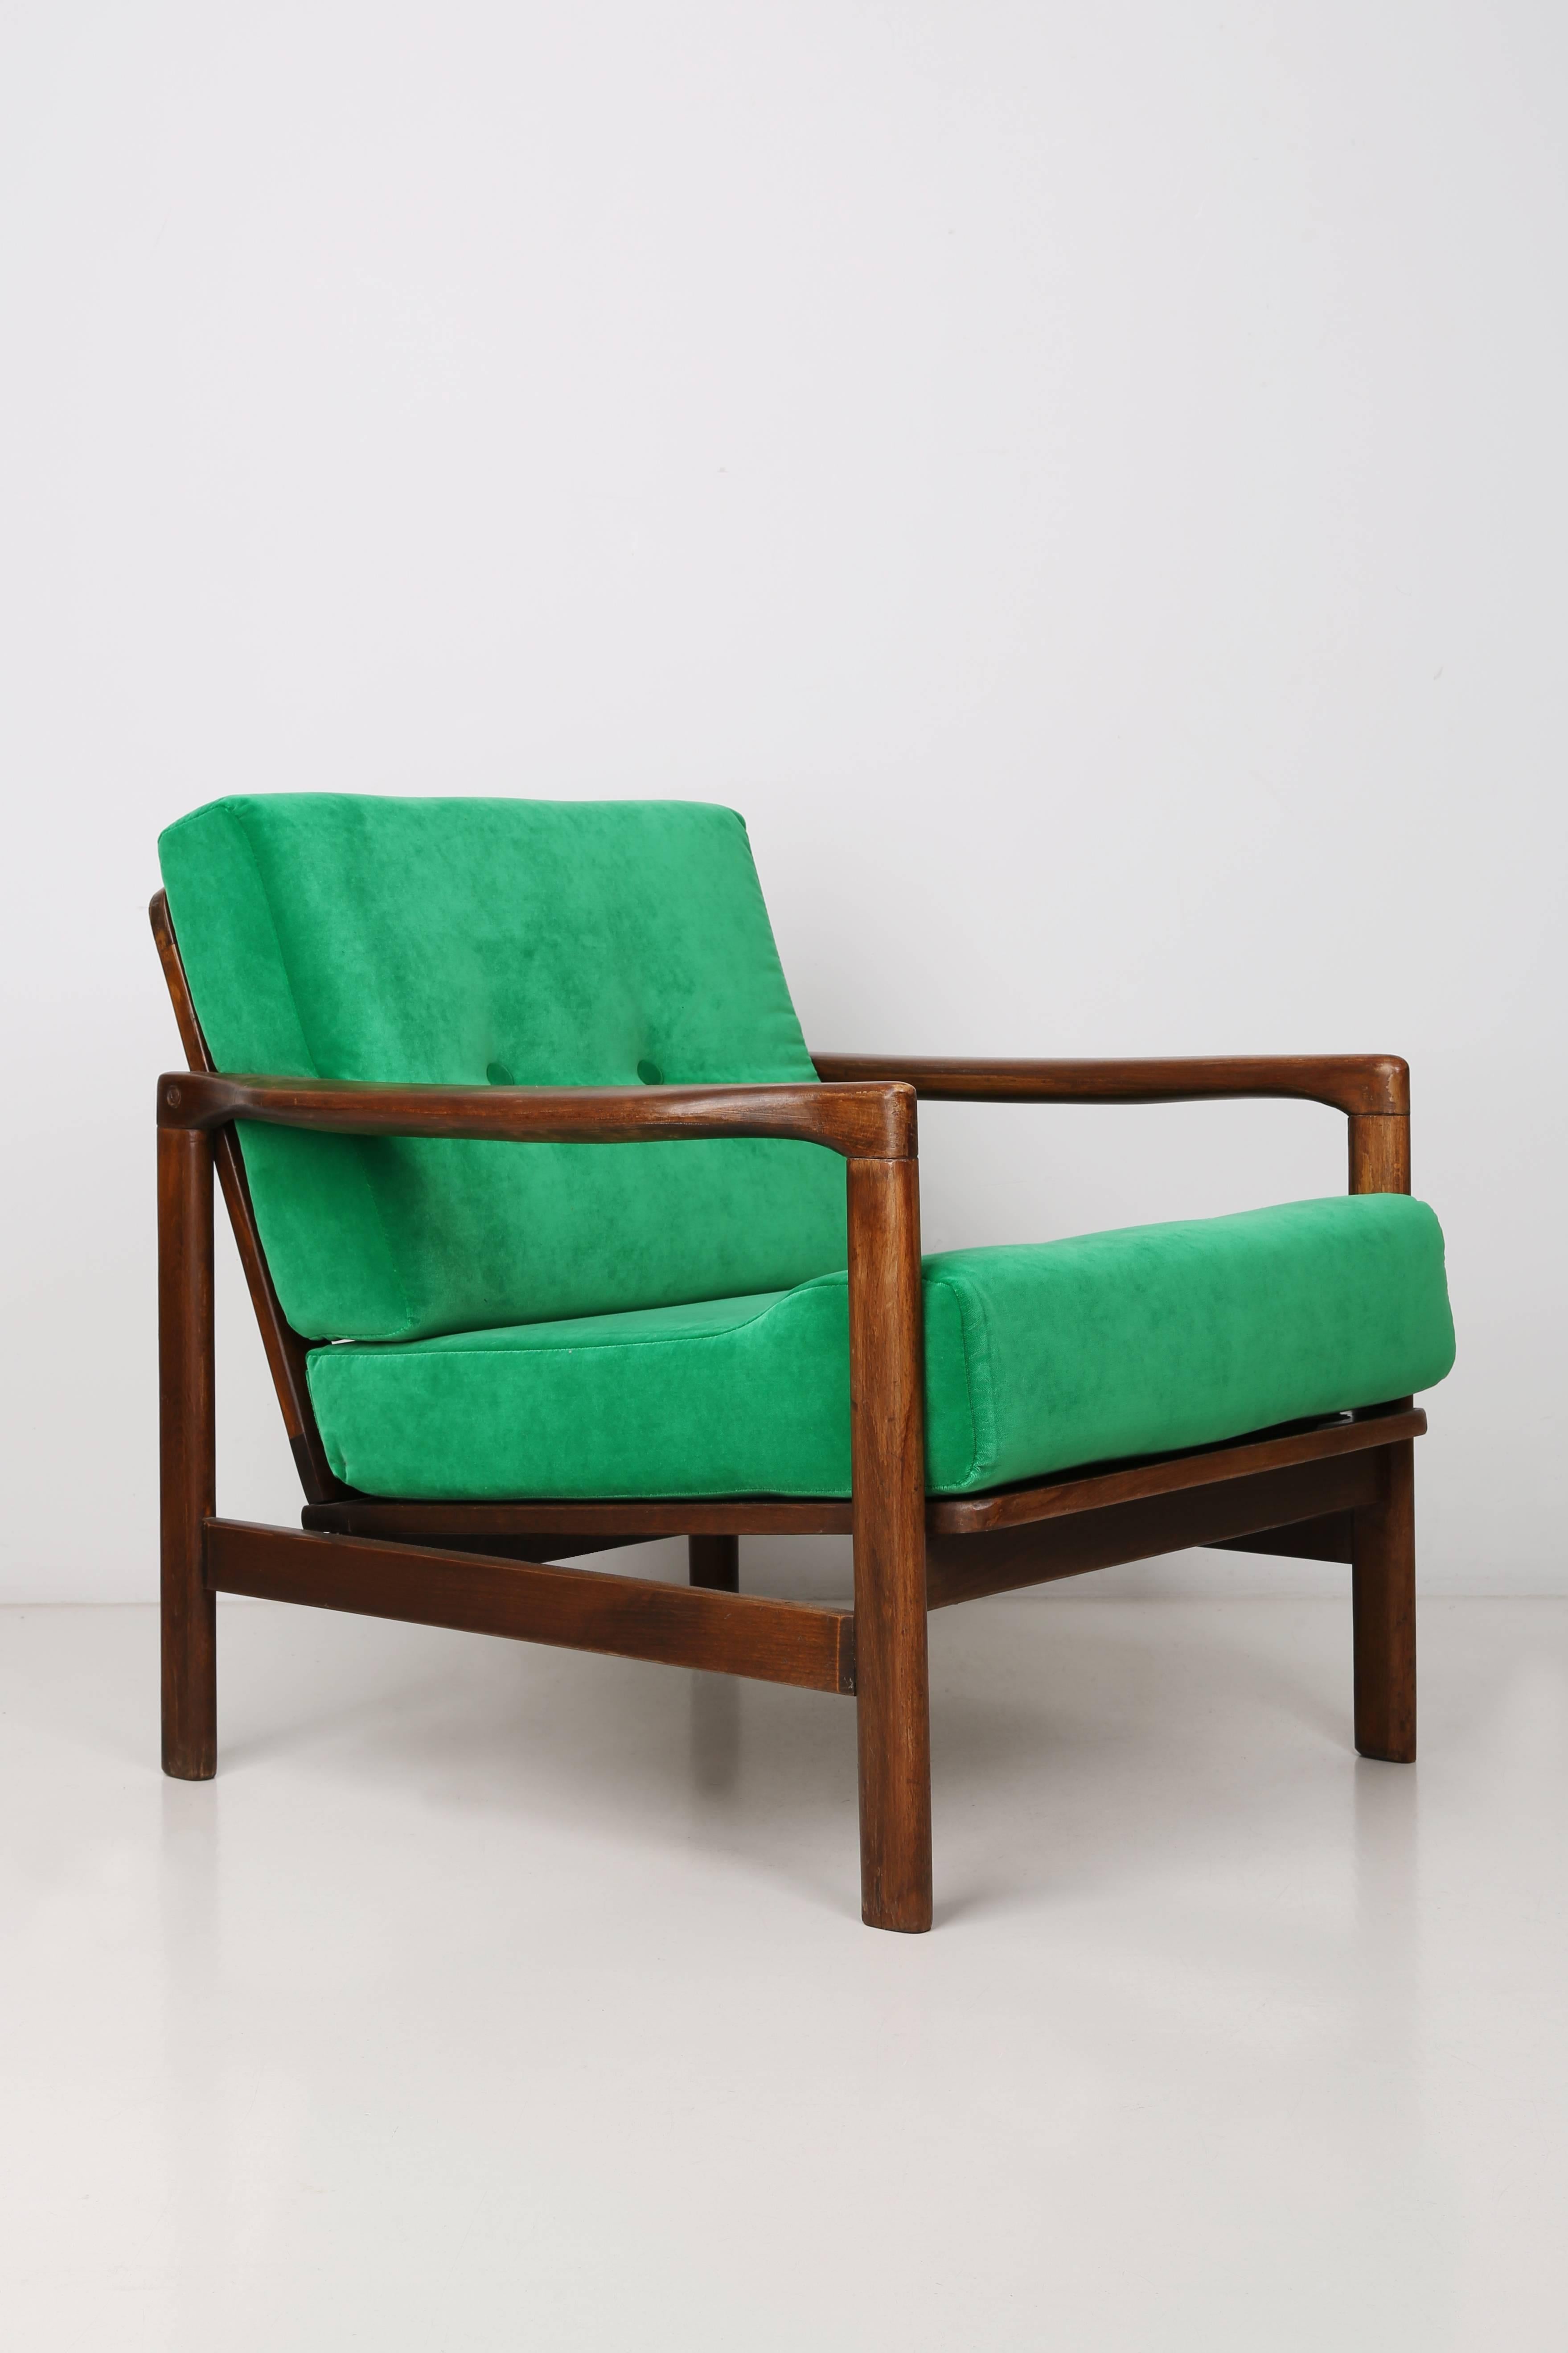 The B-7522 armchair was designed in the 1960s by Zenon Baczyk, it was produced by Swarzedz Furniture Factories in Poland. Furniture kept in perfect condition, after full upholstery renovation with refreshed woodwork. Stabile and very comfortable